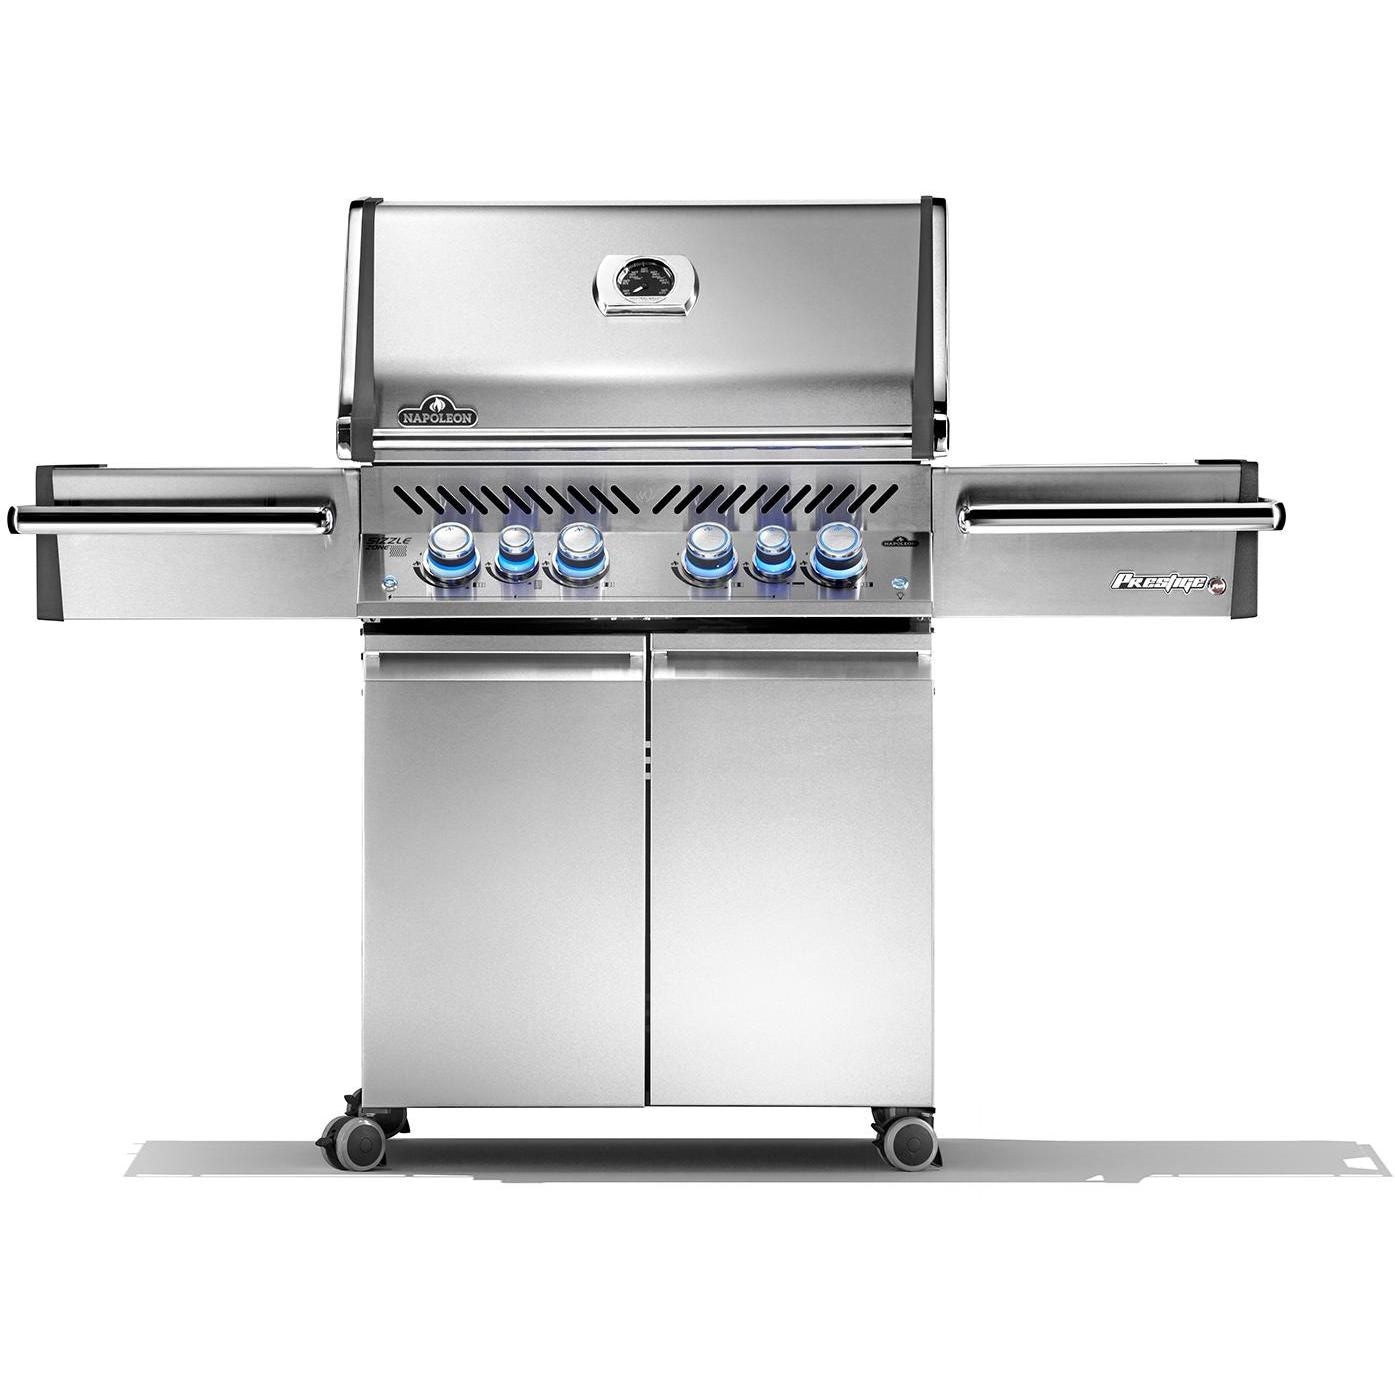 Napoleon Prestige Pro 500 Propane Gas Grill With Infrared Rear Burner And Infrared Side Burners - image 1 of 6